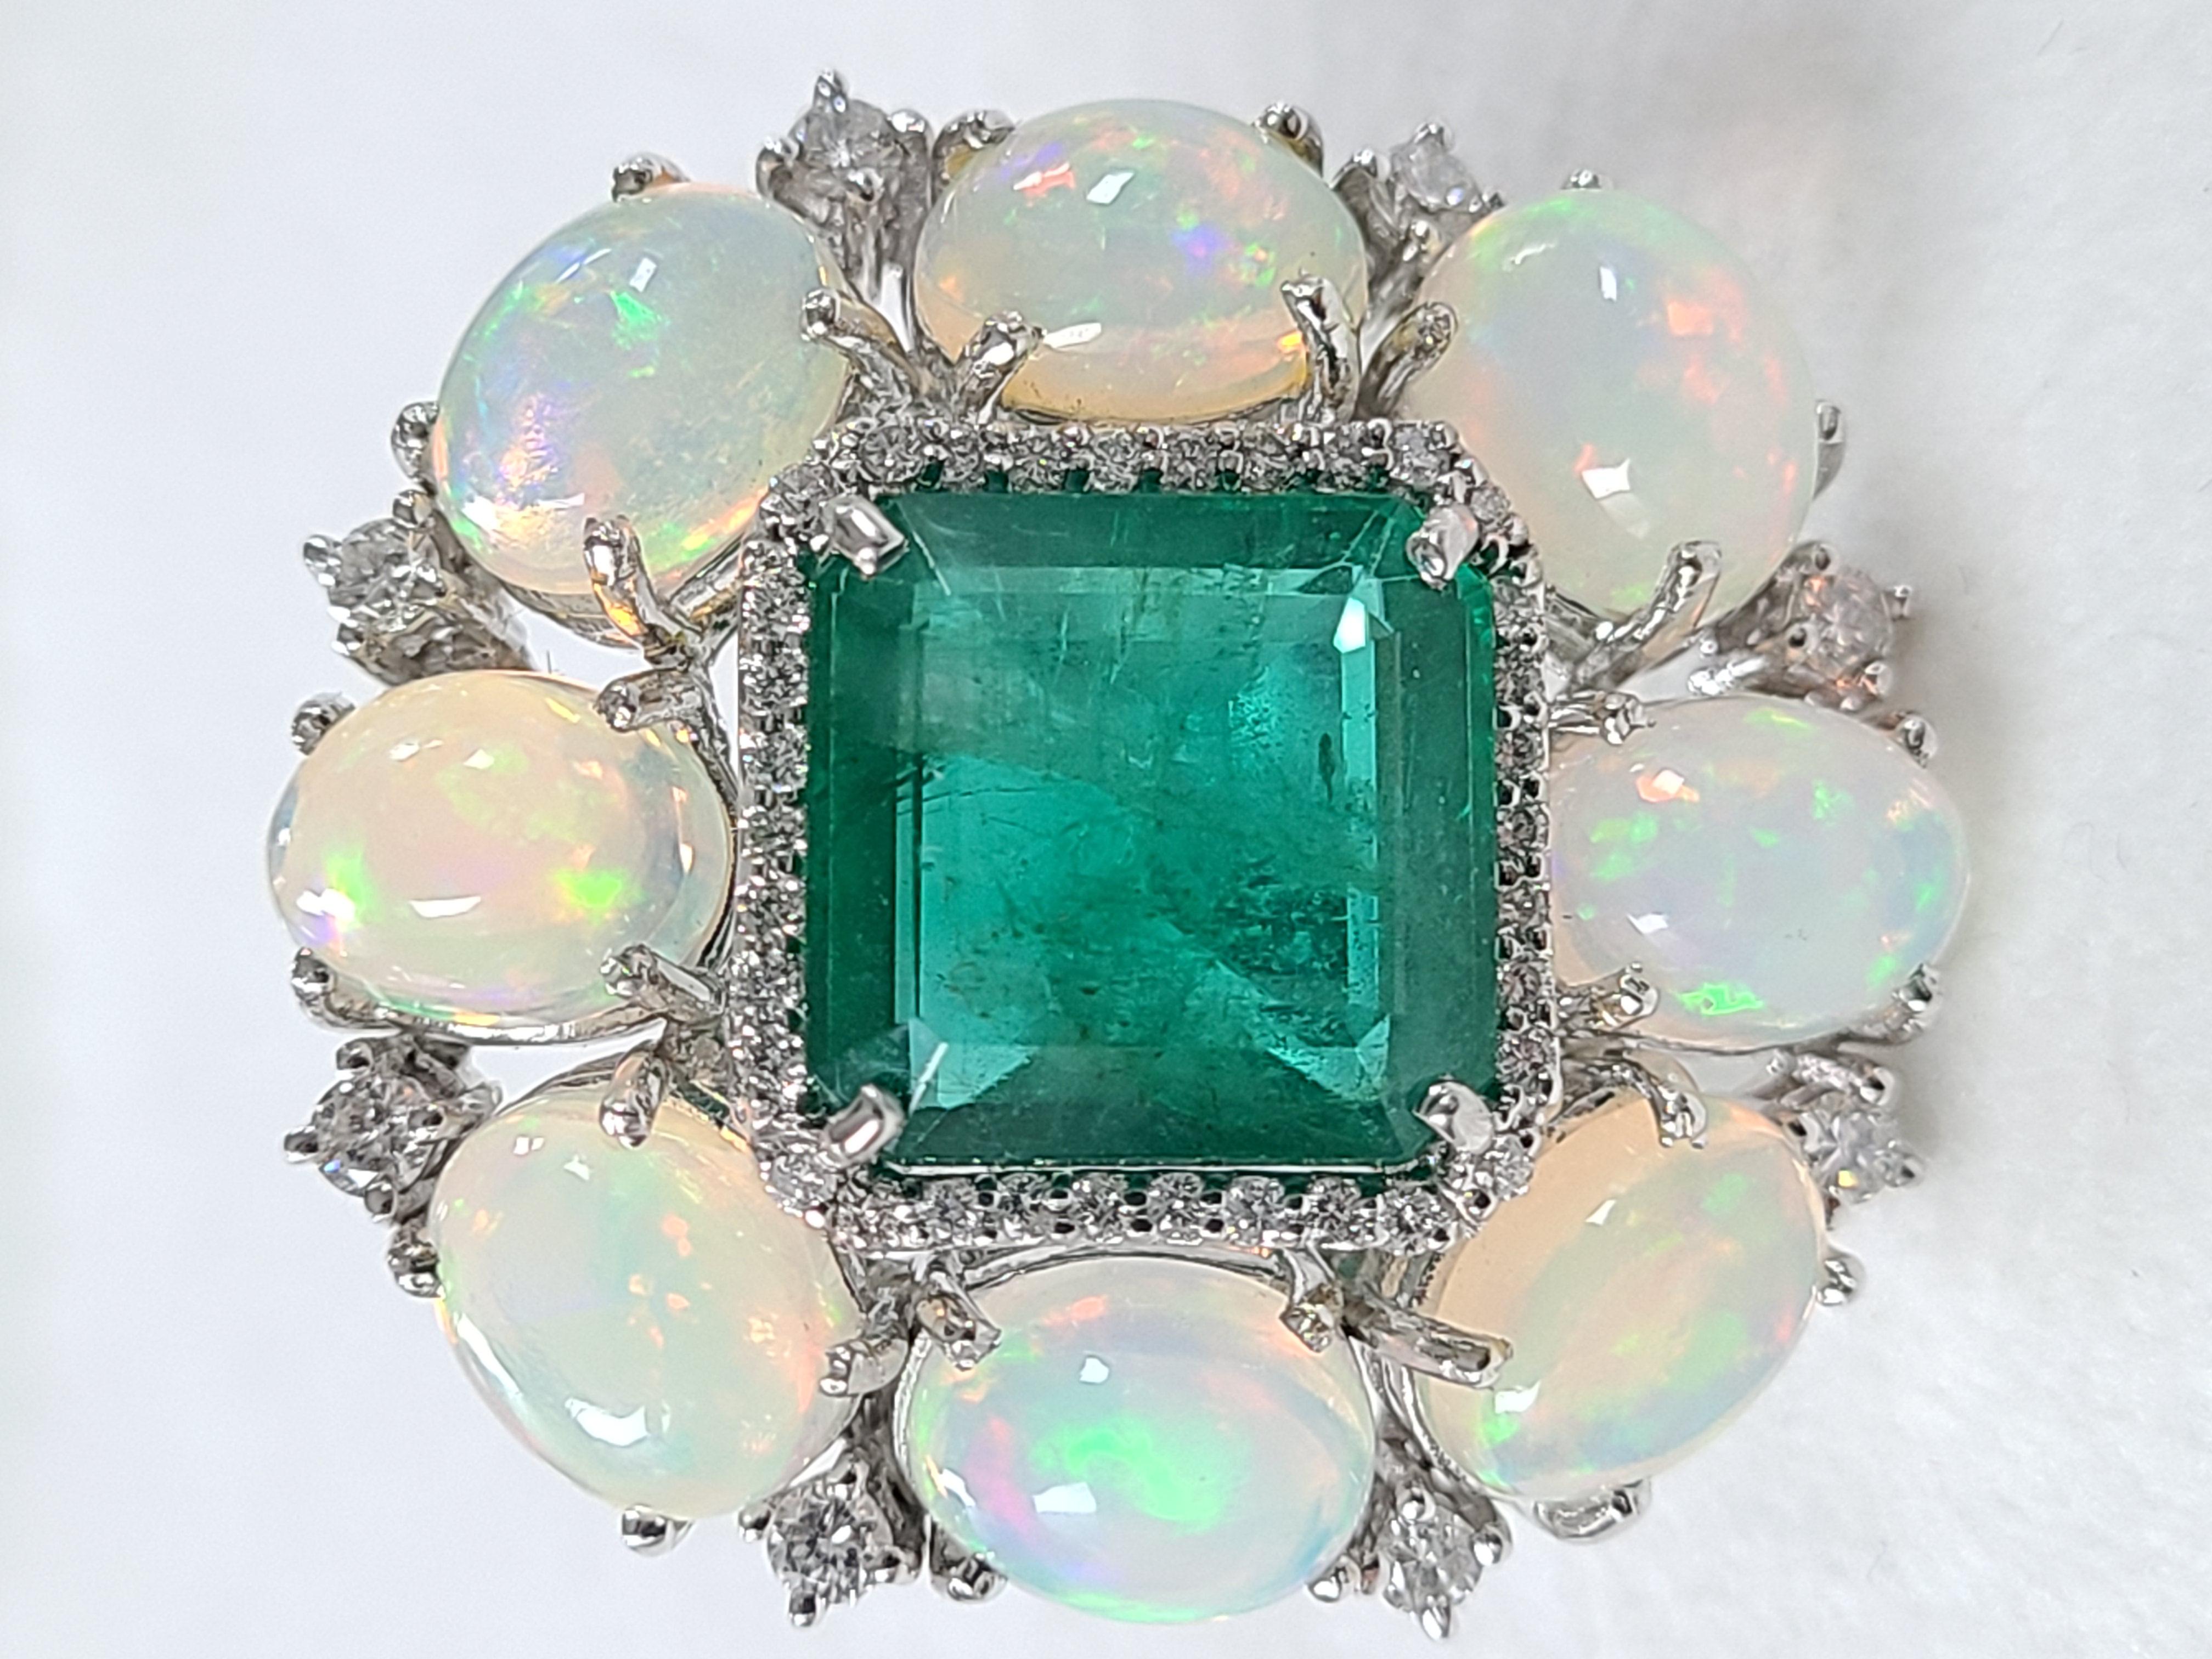 A gorgeous and very chic Ethiopian Opal & Zambian Emerald Cocktail Ring set in 18K White Gold and Diamonds. The Opals are completely natural, without any treatment, originating from Ethiopia and weighs, 8.40 carats. The Emerald is also completely